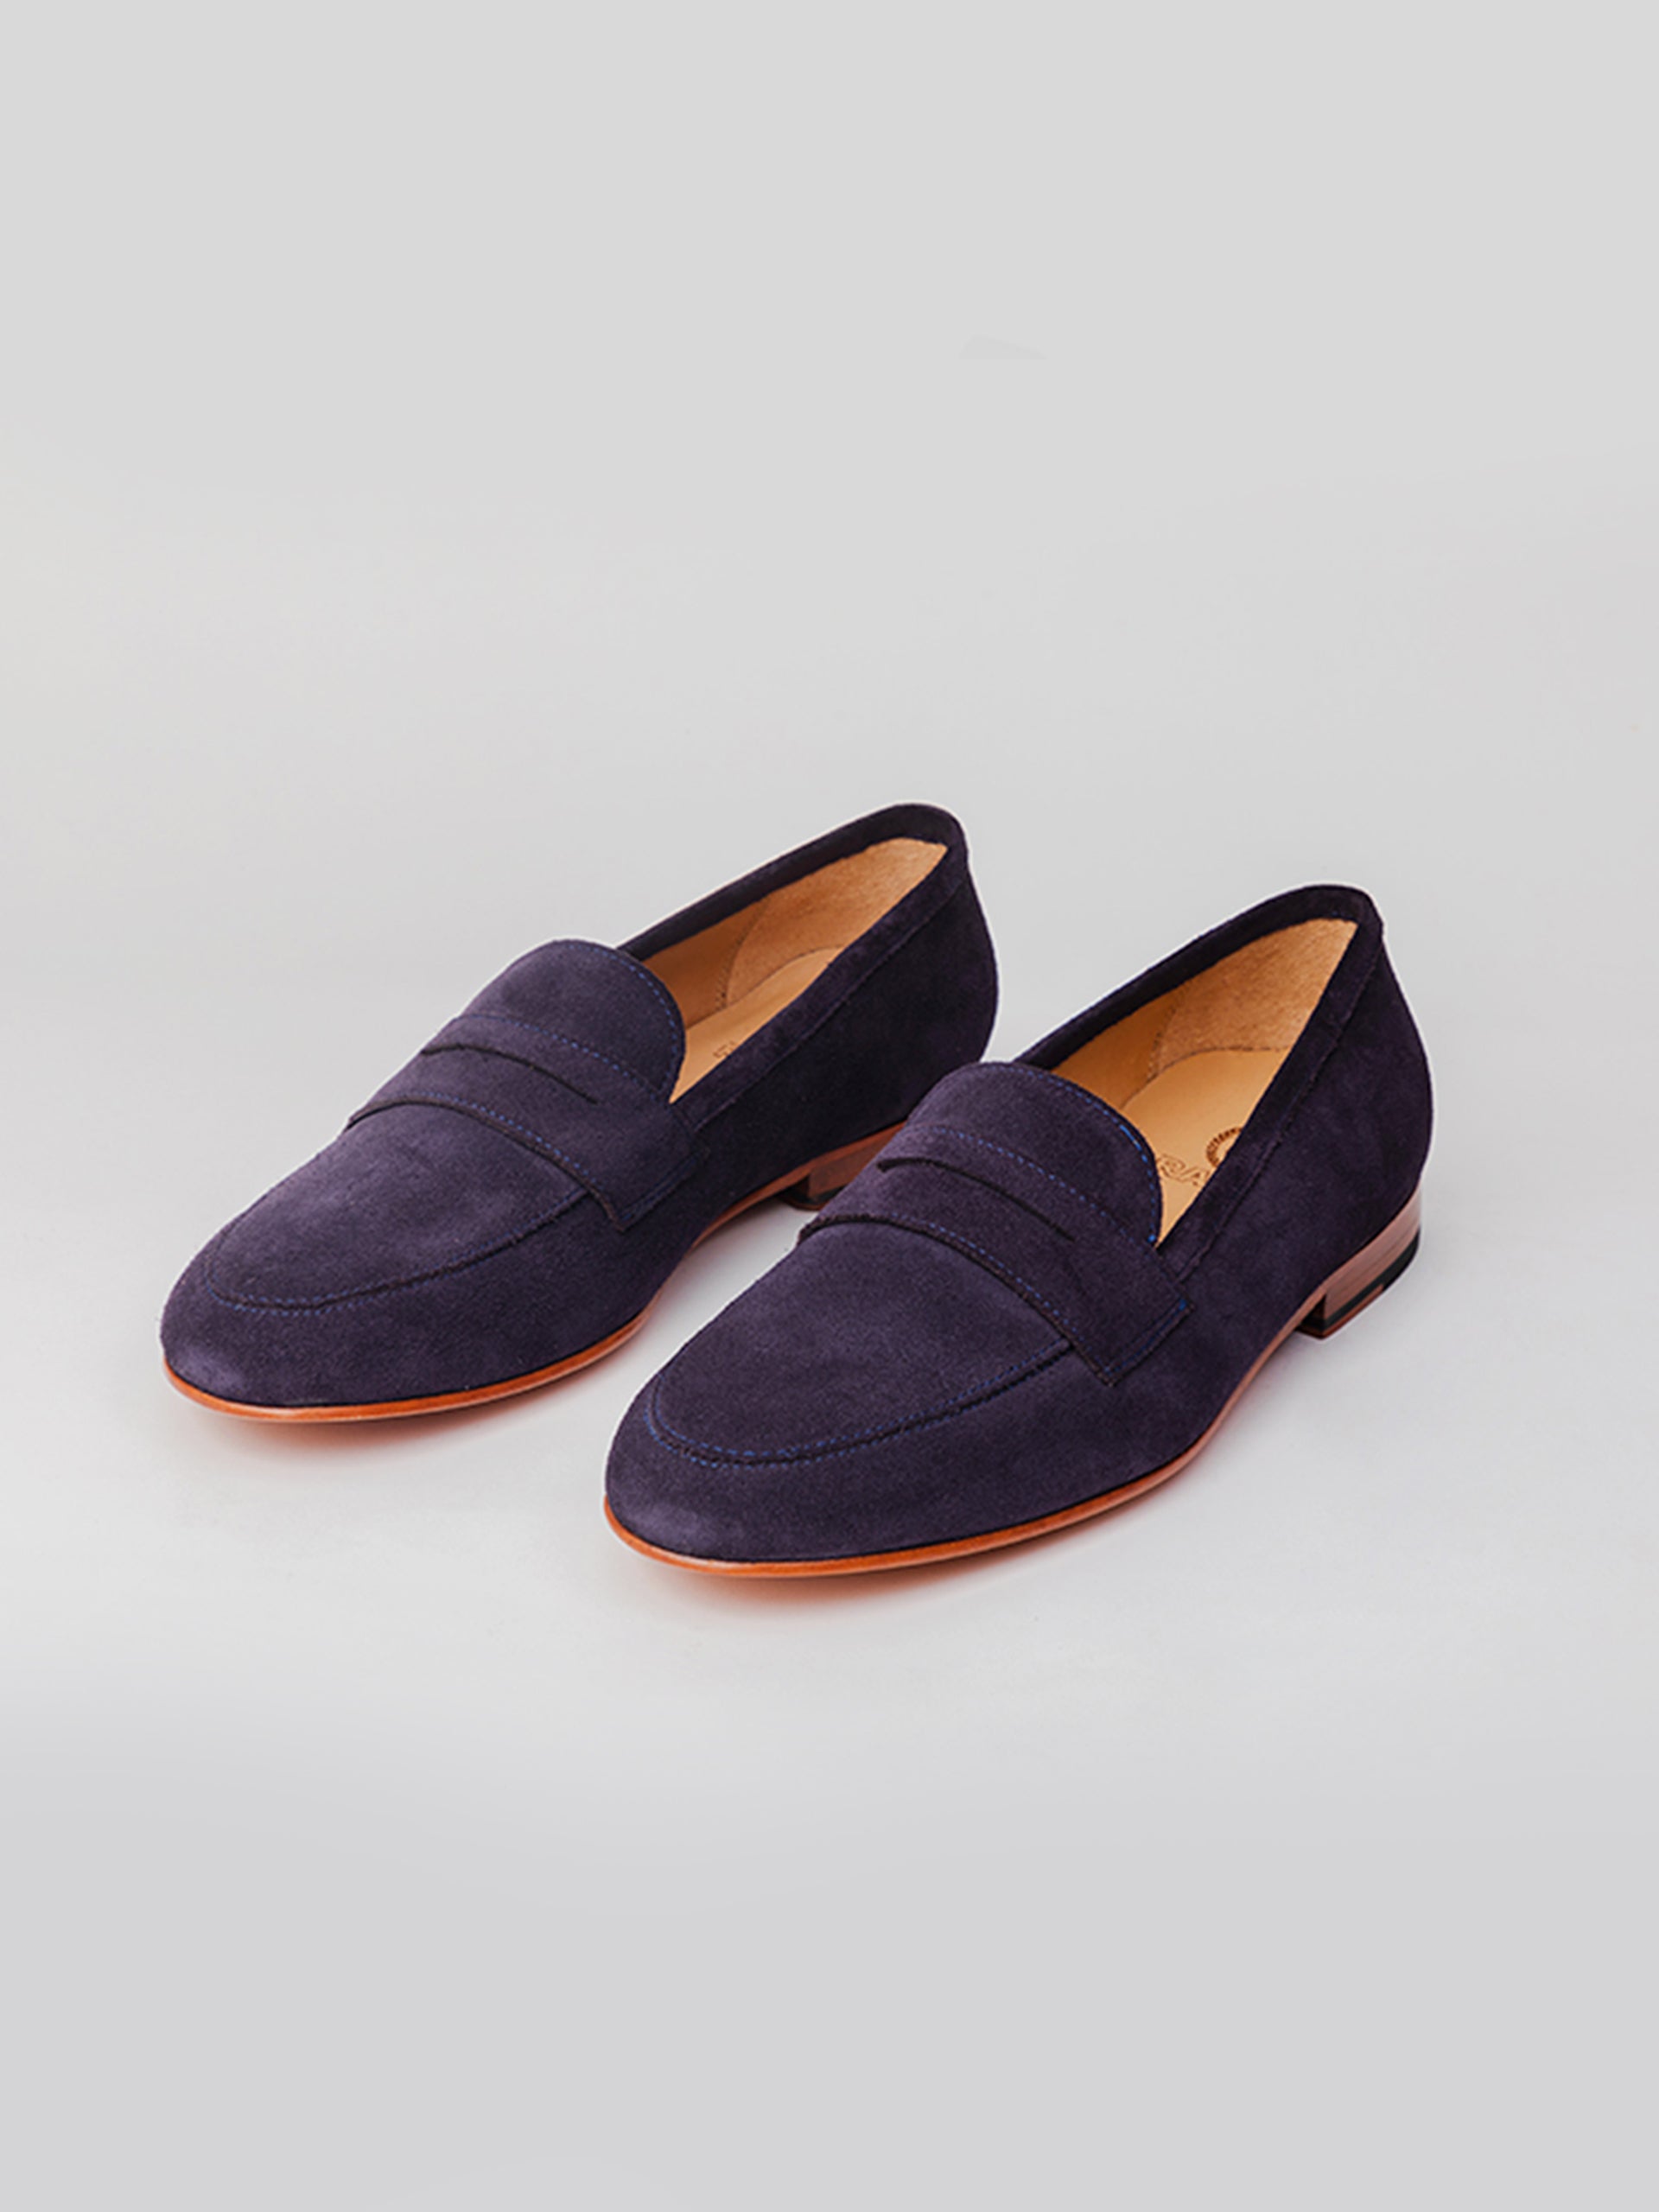 Buy Best Loafers For Men | Authentic Leather Shoes for Men Online ...